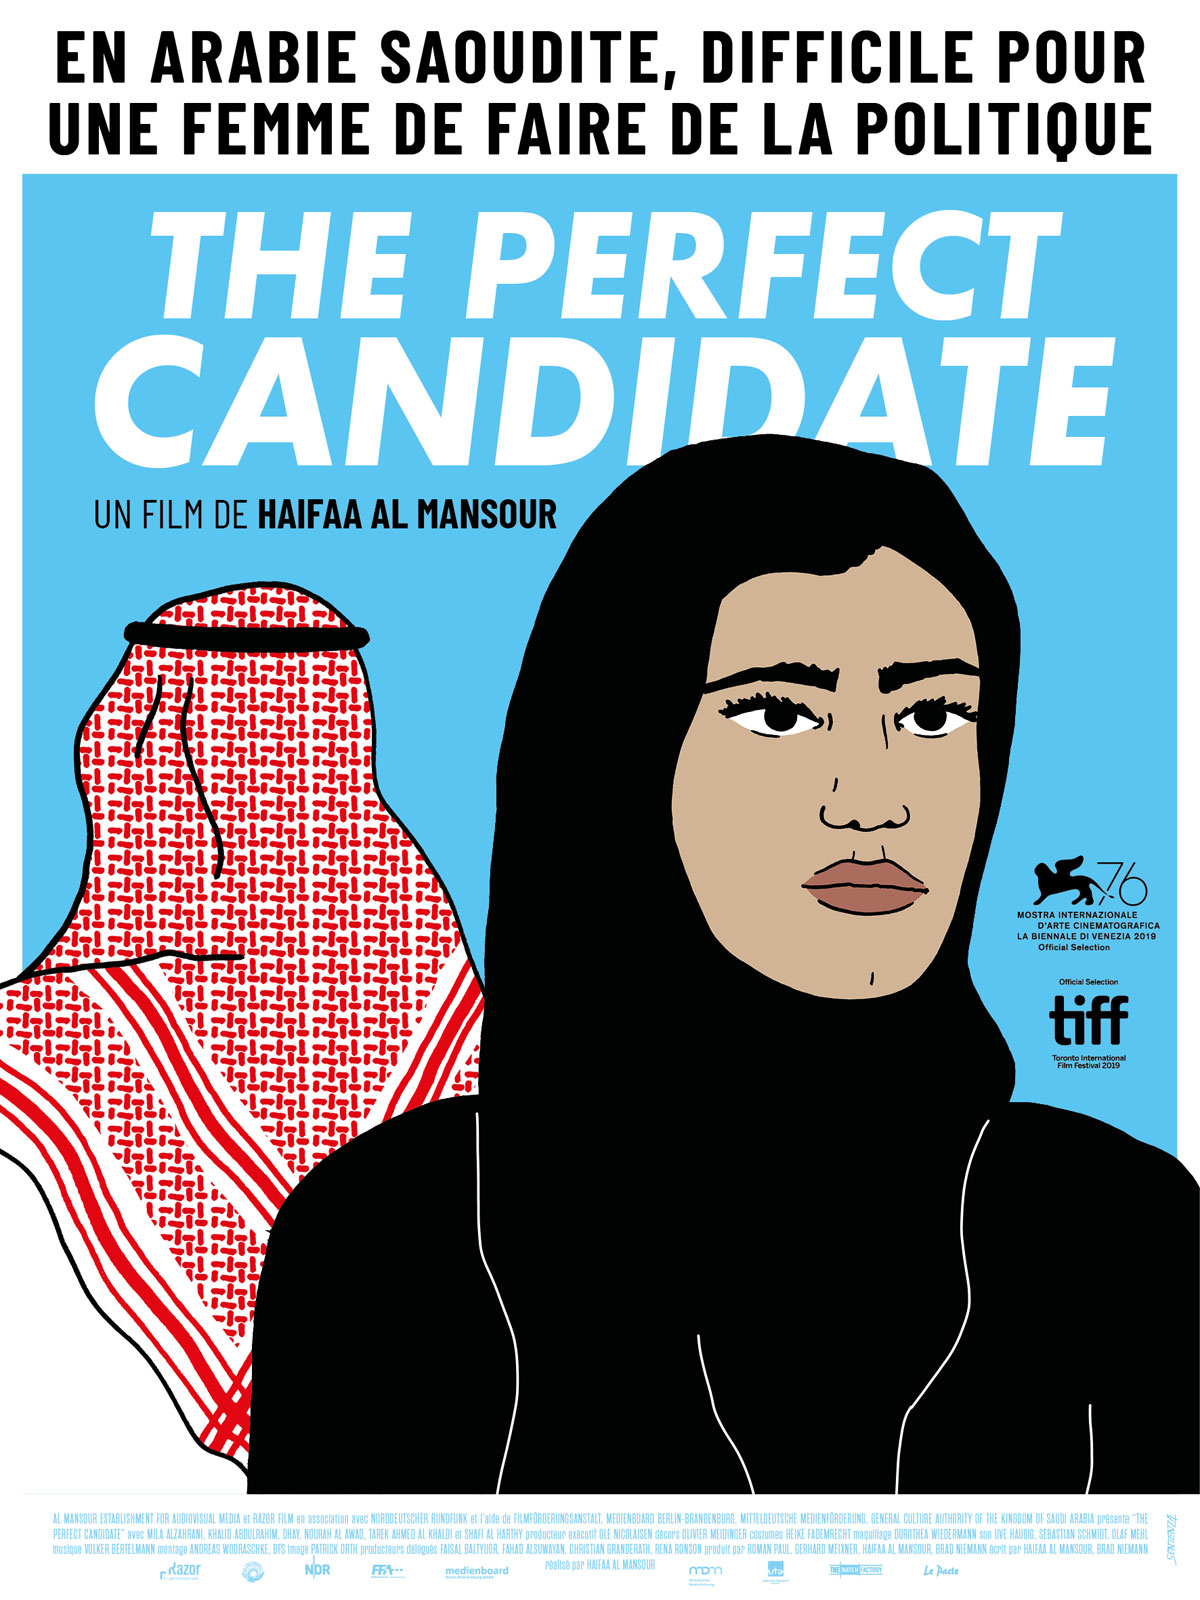 THE PERFECT CANDIDATE AFFICHE